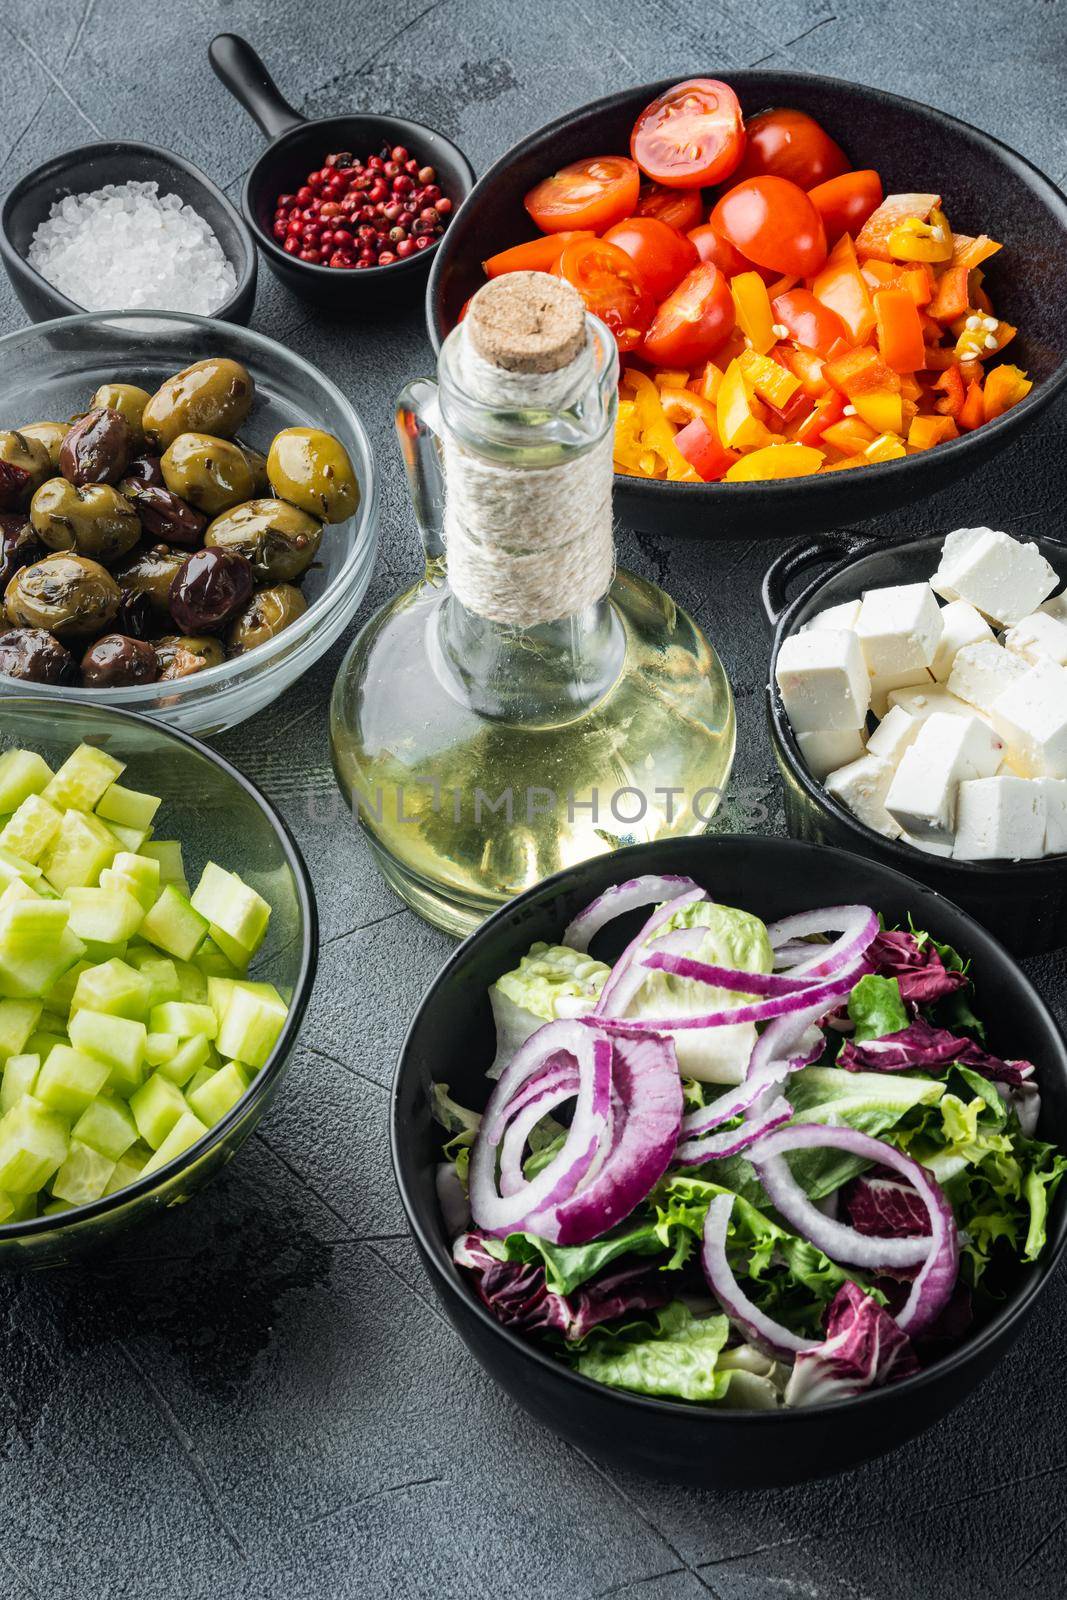 Ingredients for traditional greek salad, Tomatoes, onion, olives, feta cheese, on gray background